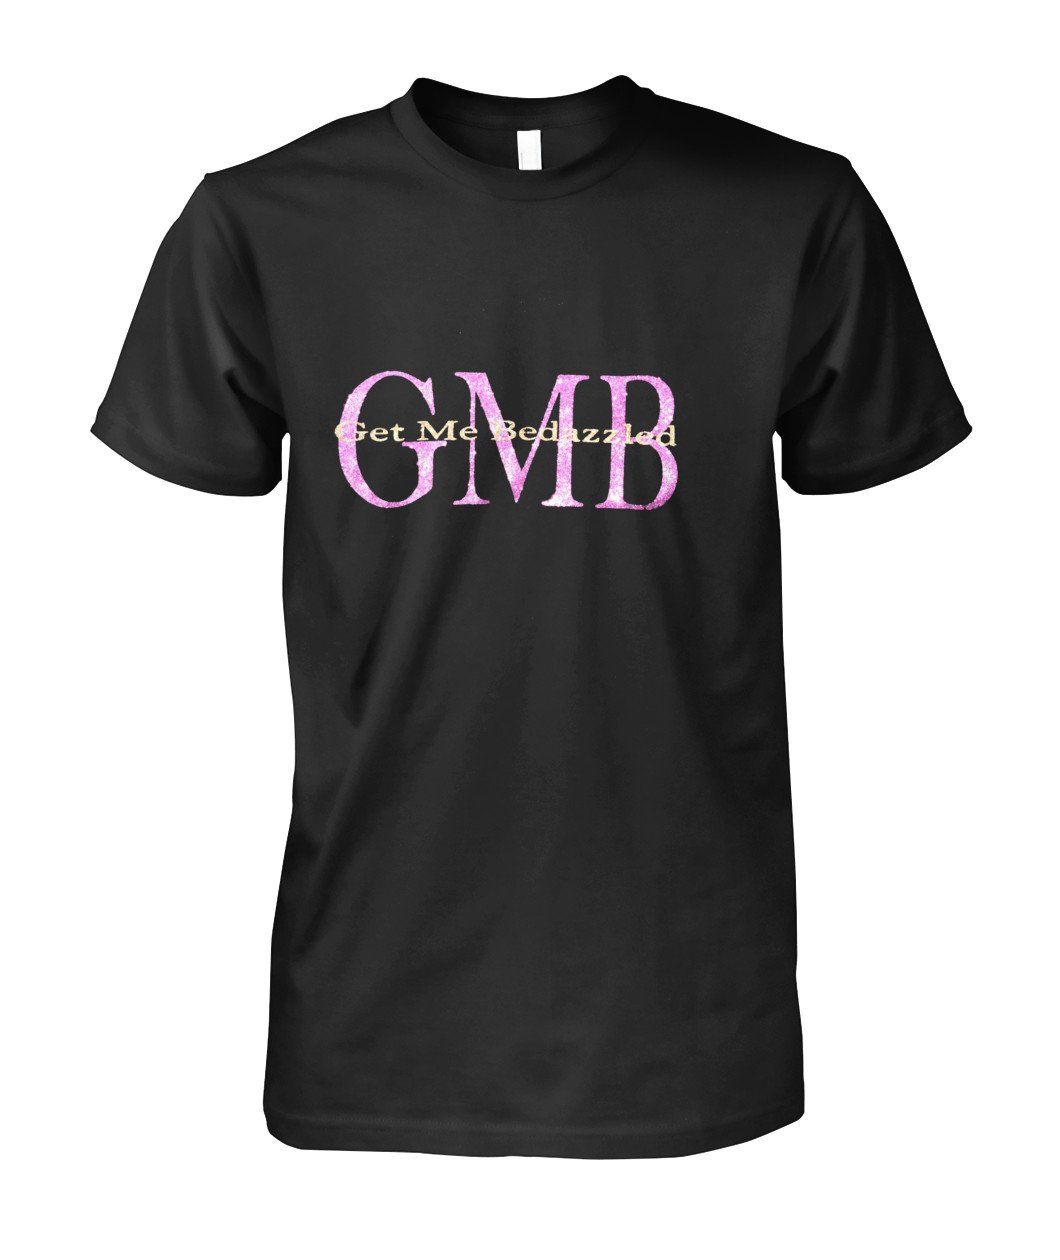 Get Me Bedazzled Glitter- Vinyl T-Shirt-Short Sleeves-Get Me Bedazzled